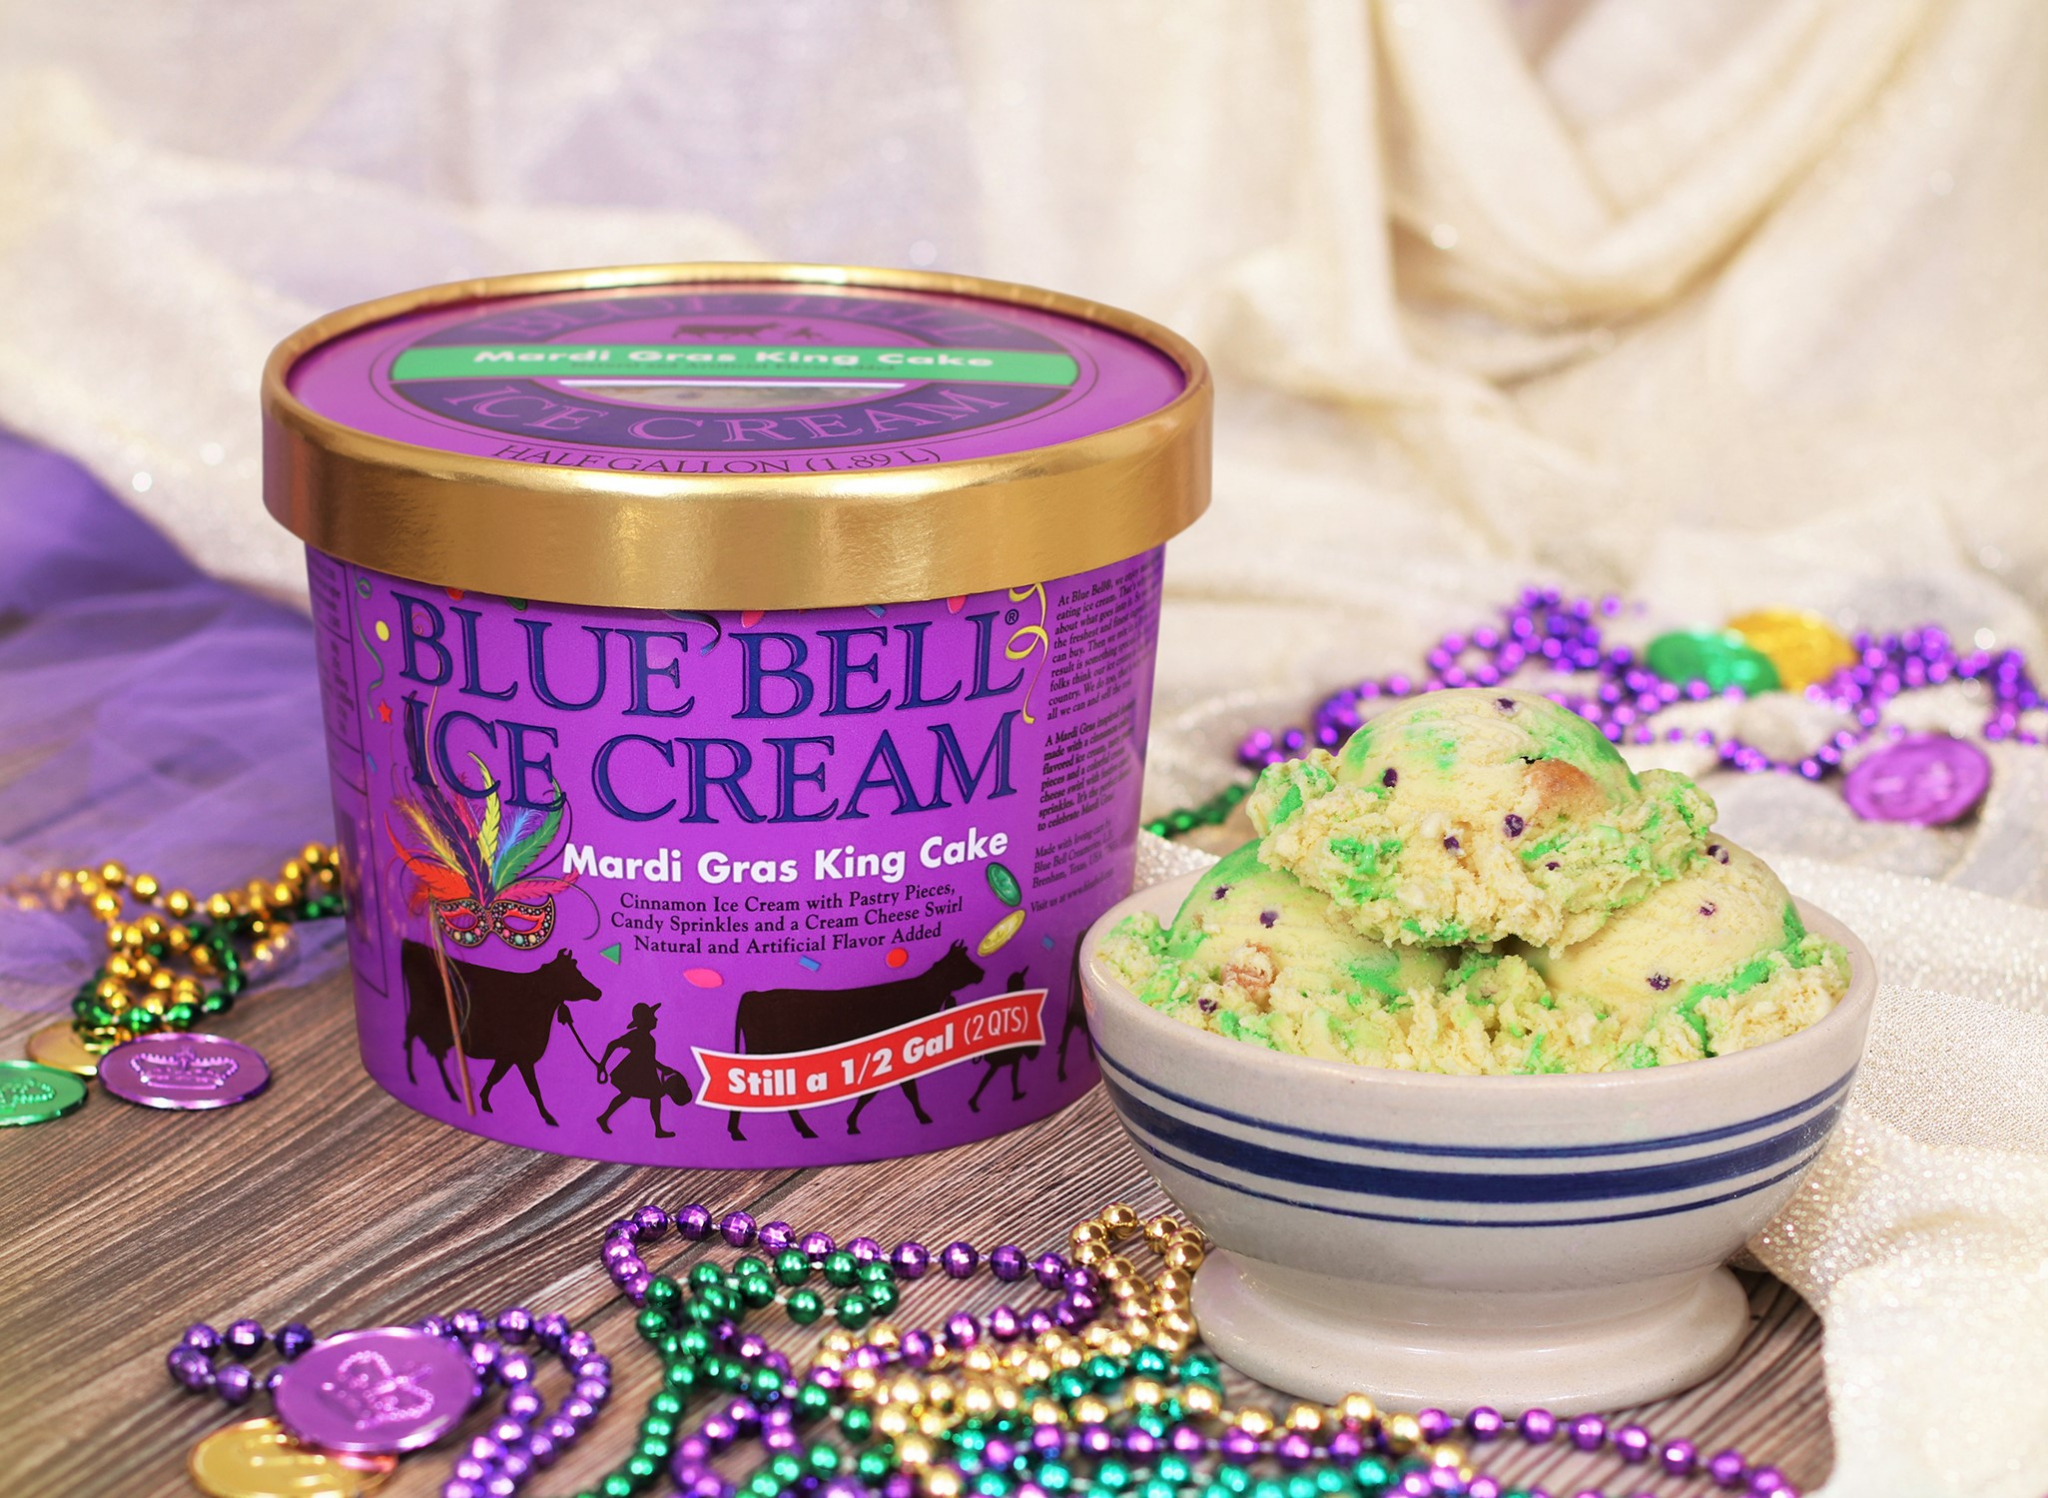 This Mardi Gras, try Blue Bell’s King Cake ice cream flavor